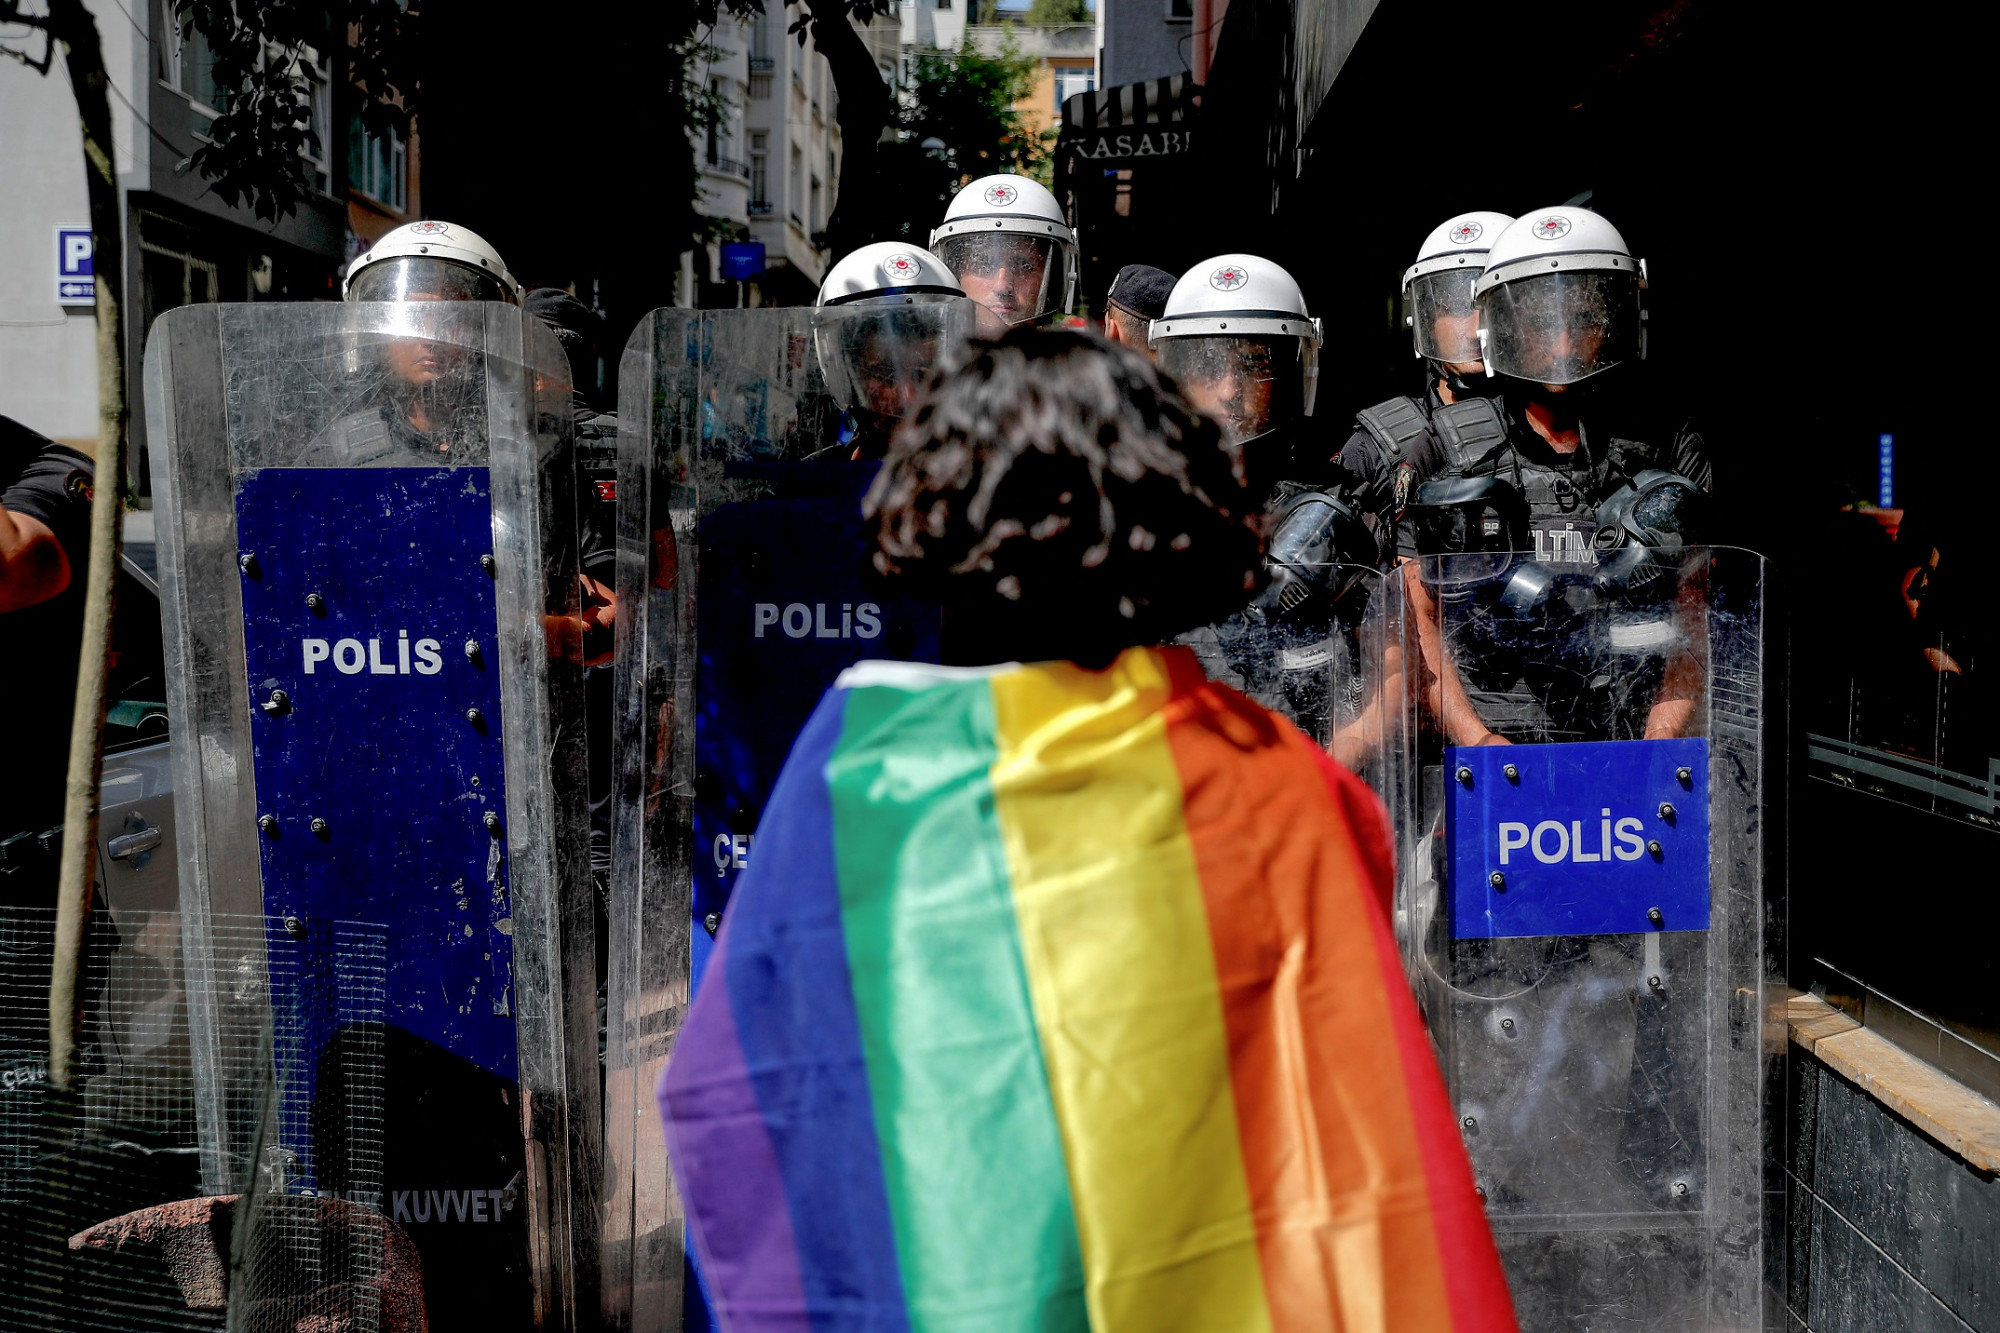 The Turkish police disbanded the Pride organization in Istanbul again this year